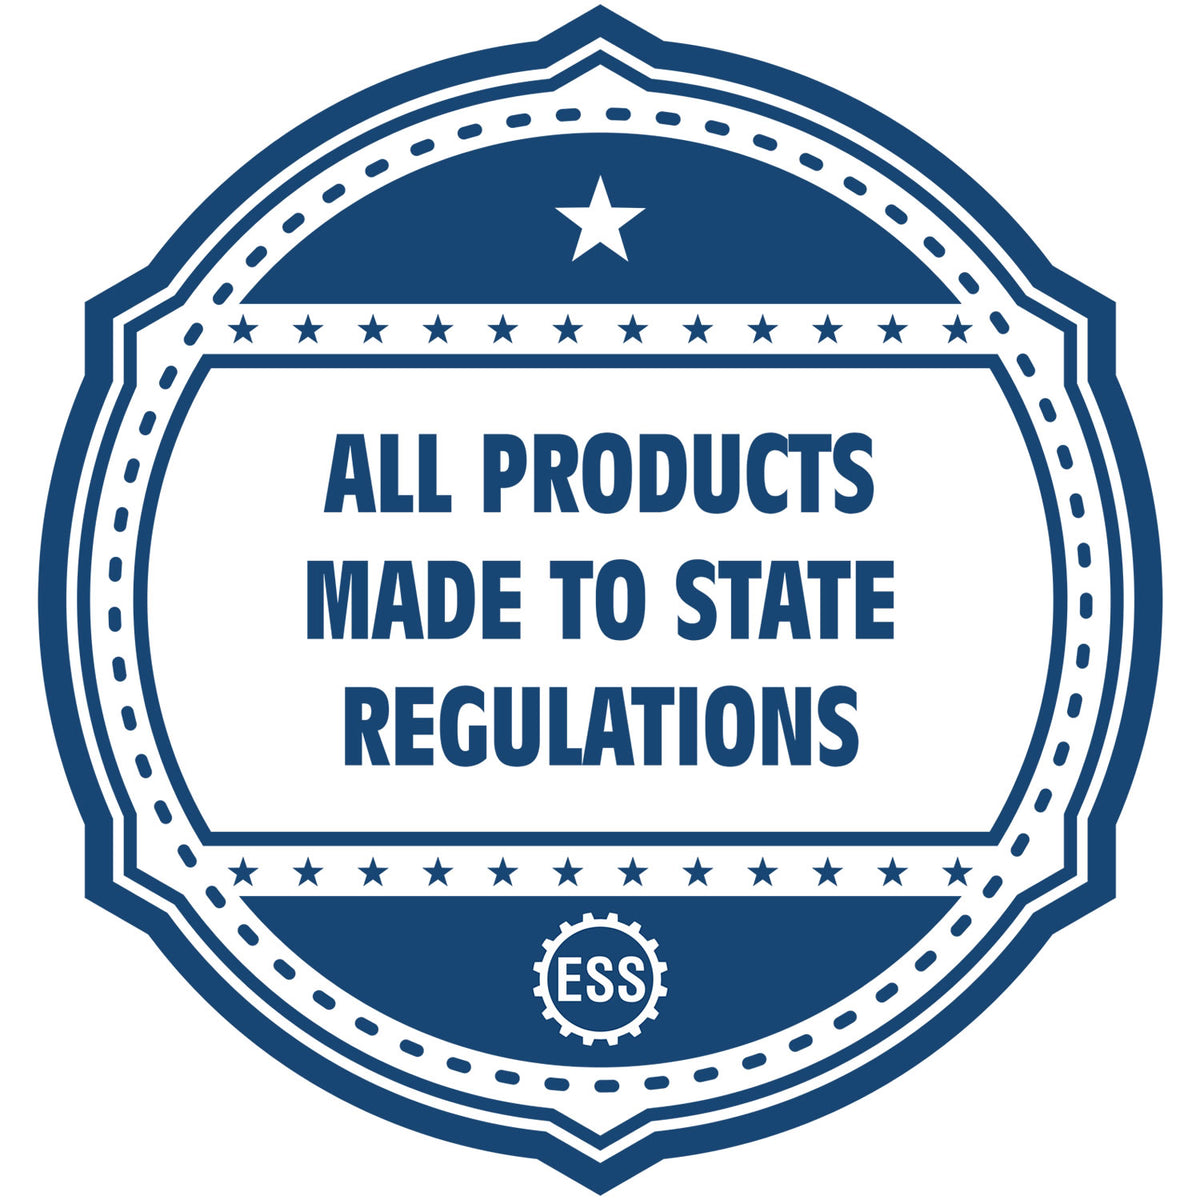 An icon or badge element for the Slim Pre-Inked Utah Landscape Architect Seal Stamp showing that this product is made in compliance with state regulations.